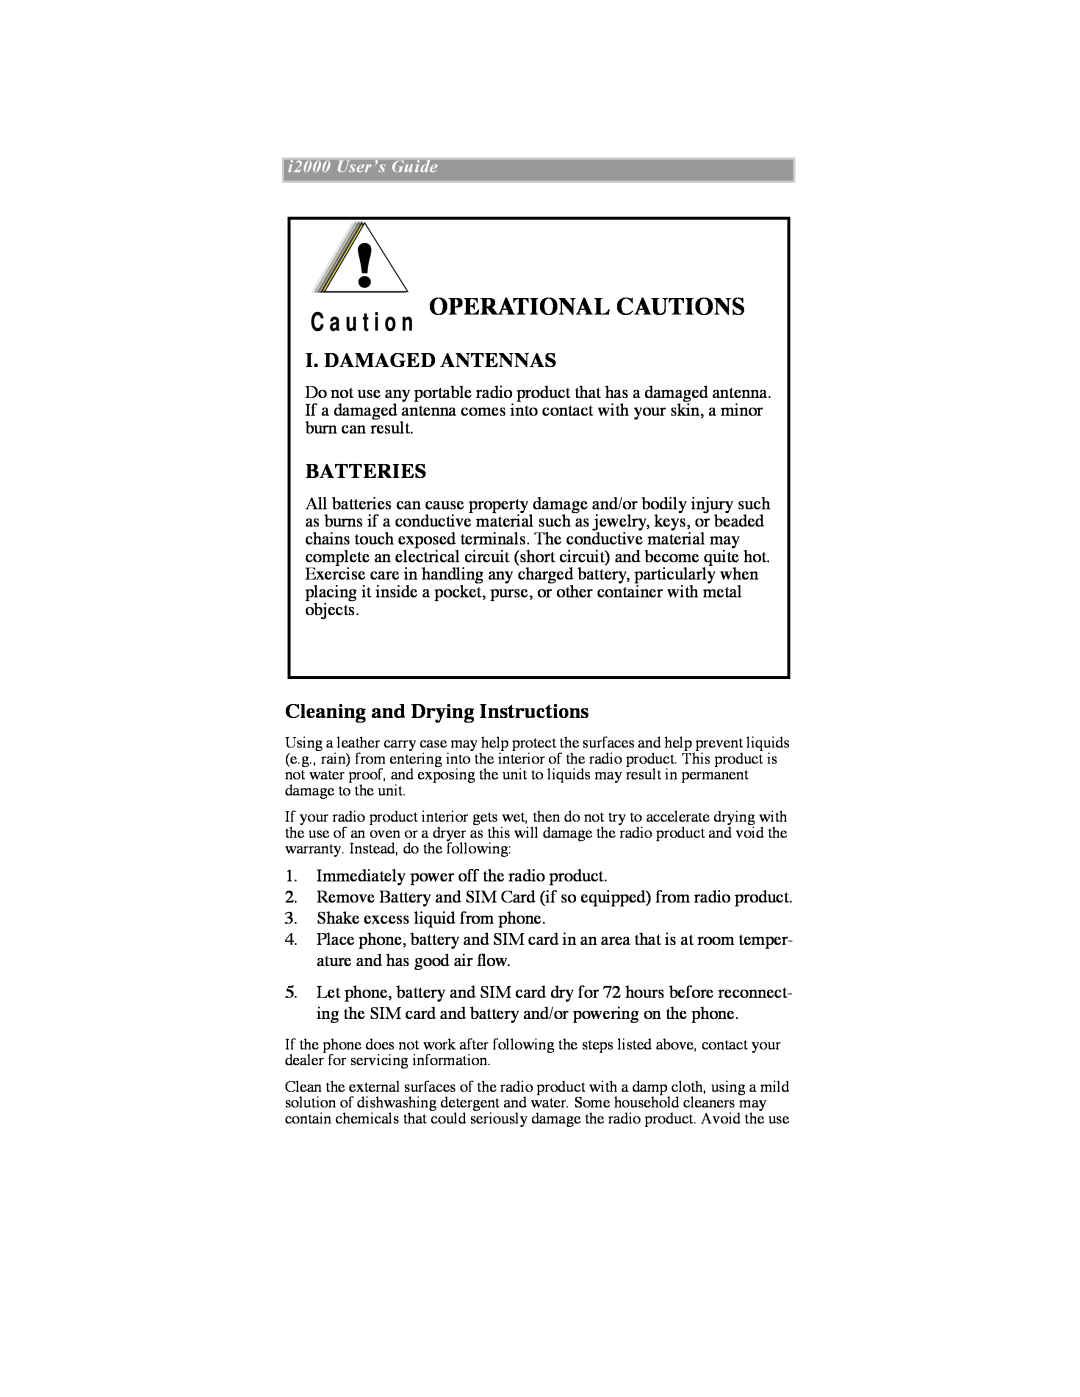 Motorola iDEN manual Operational Cautions, C a u t i o n, I. Damaged Antennas, Batteries, Cleaning and Drying Instructions 